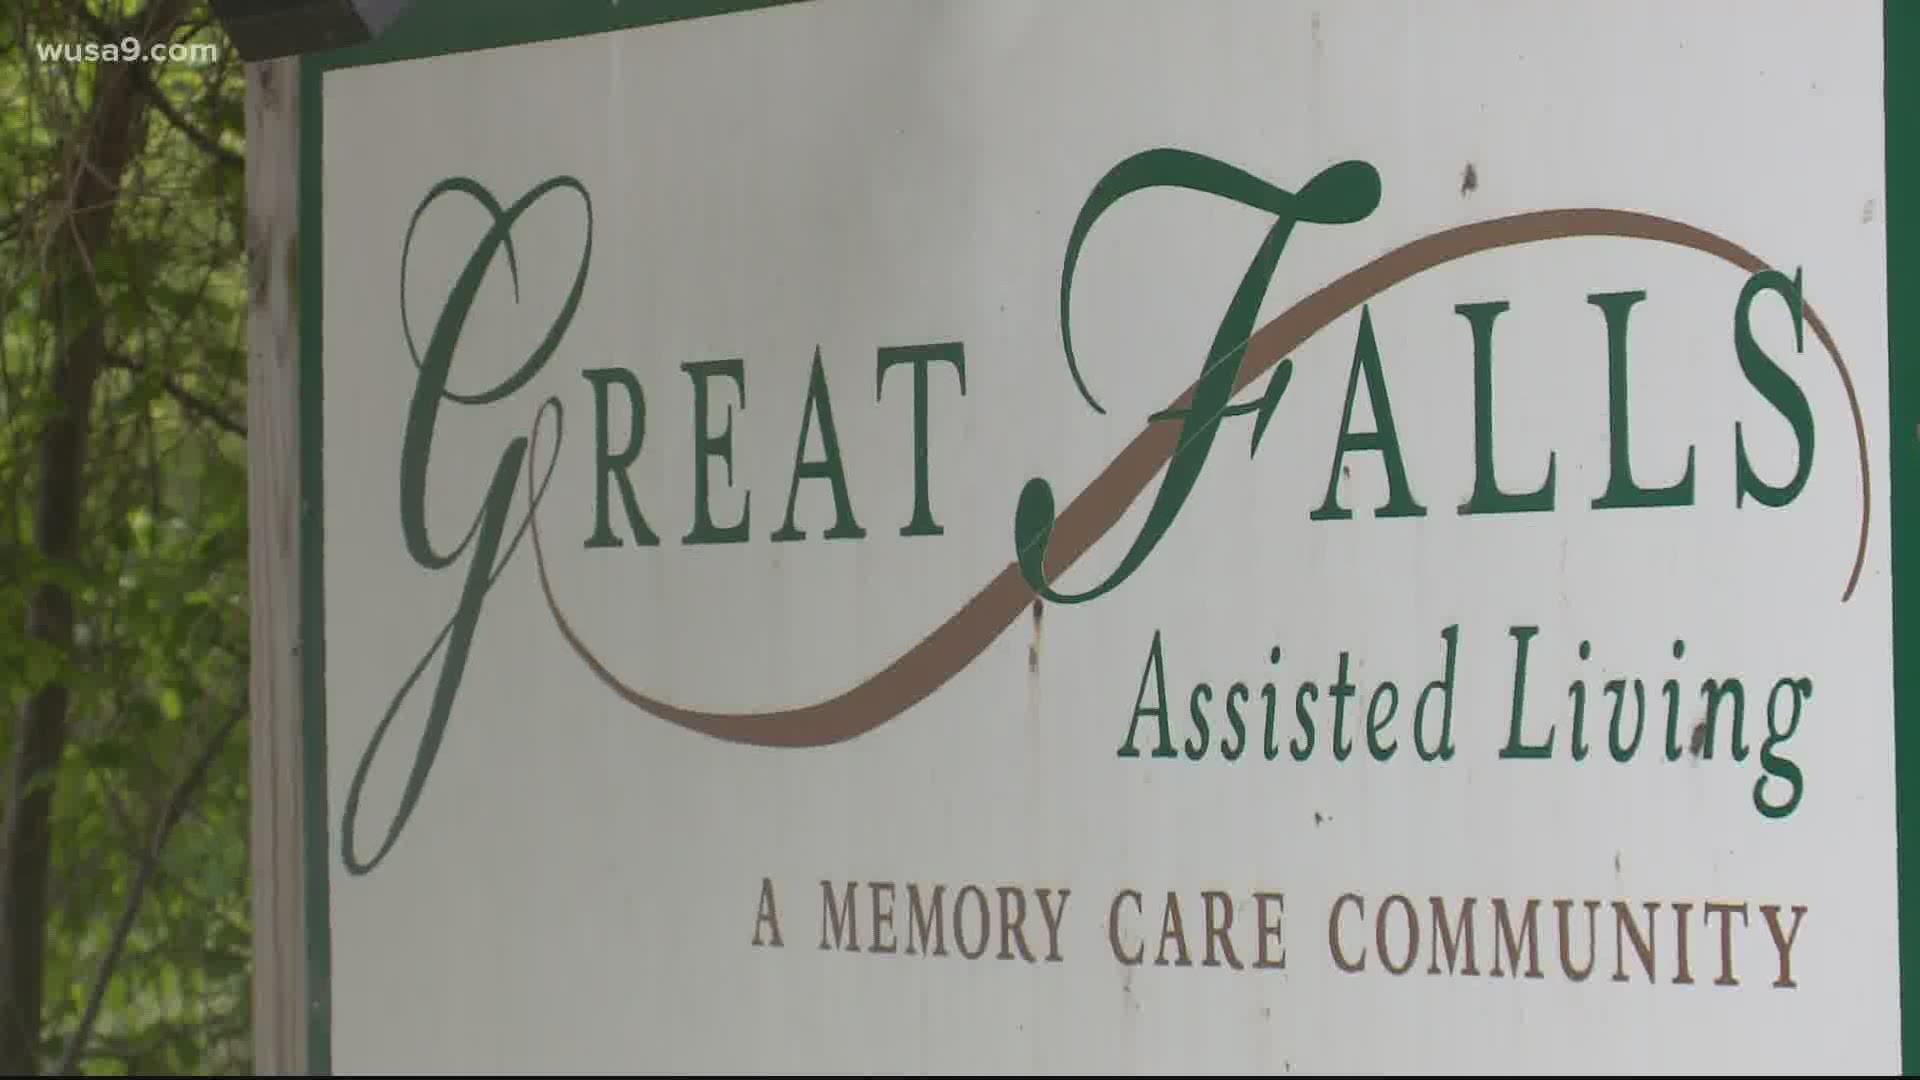 CDC guidelines recommend universal testing at facilities struggling with an outbreak. But that's not happening yet at Great Falls Assisted Living.